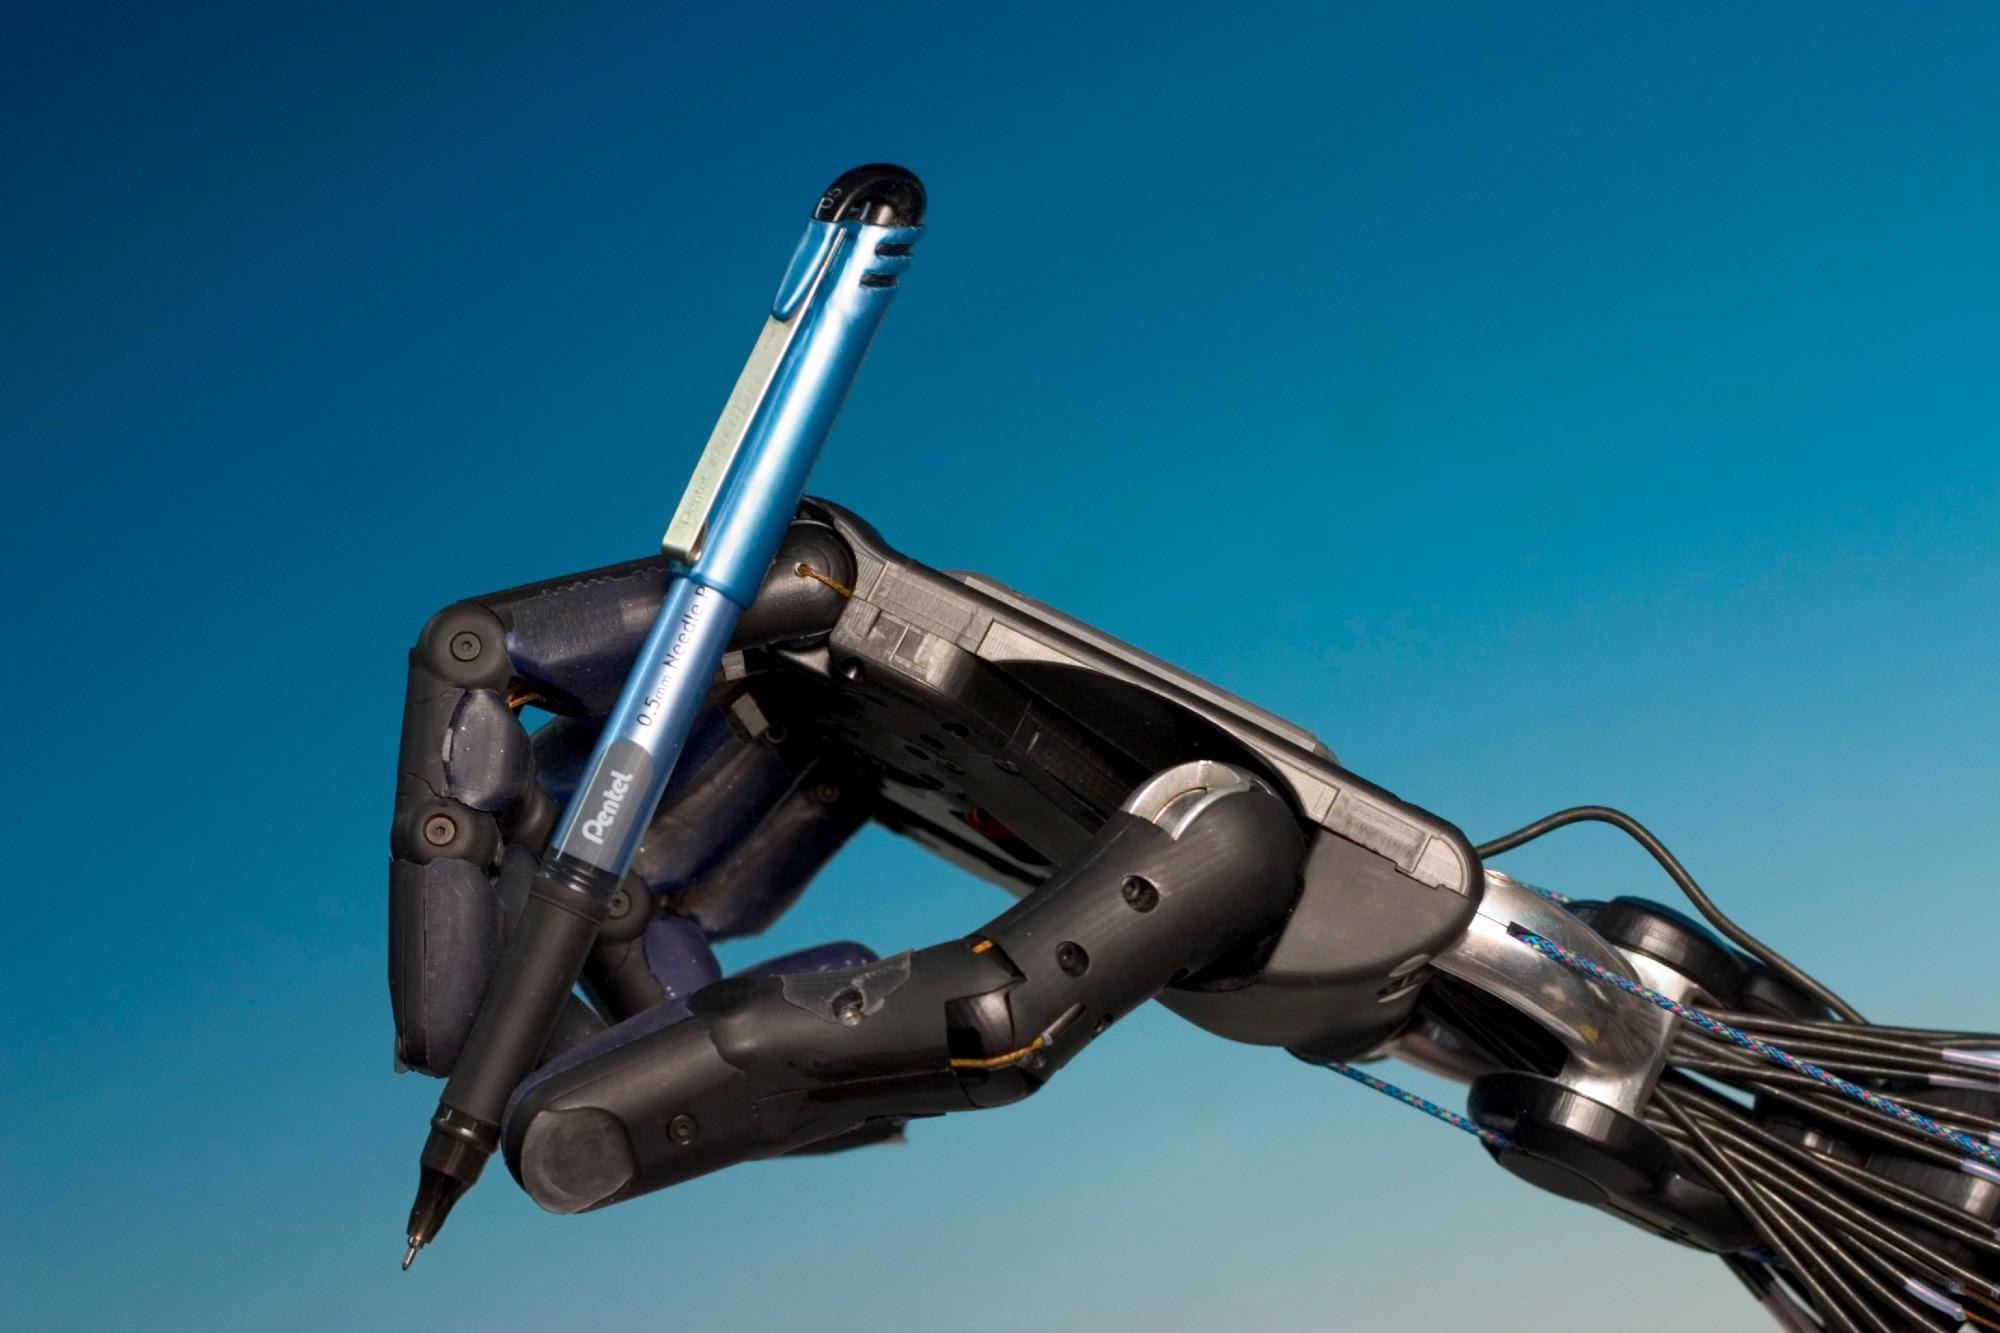 Robot Hands One Step Closer to Human Thanks to WMG AI Algorithms